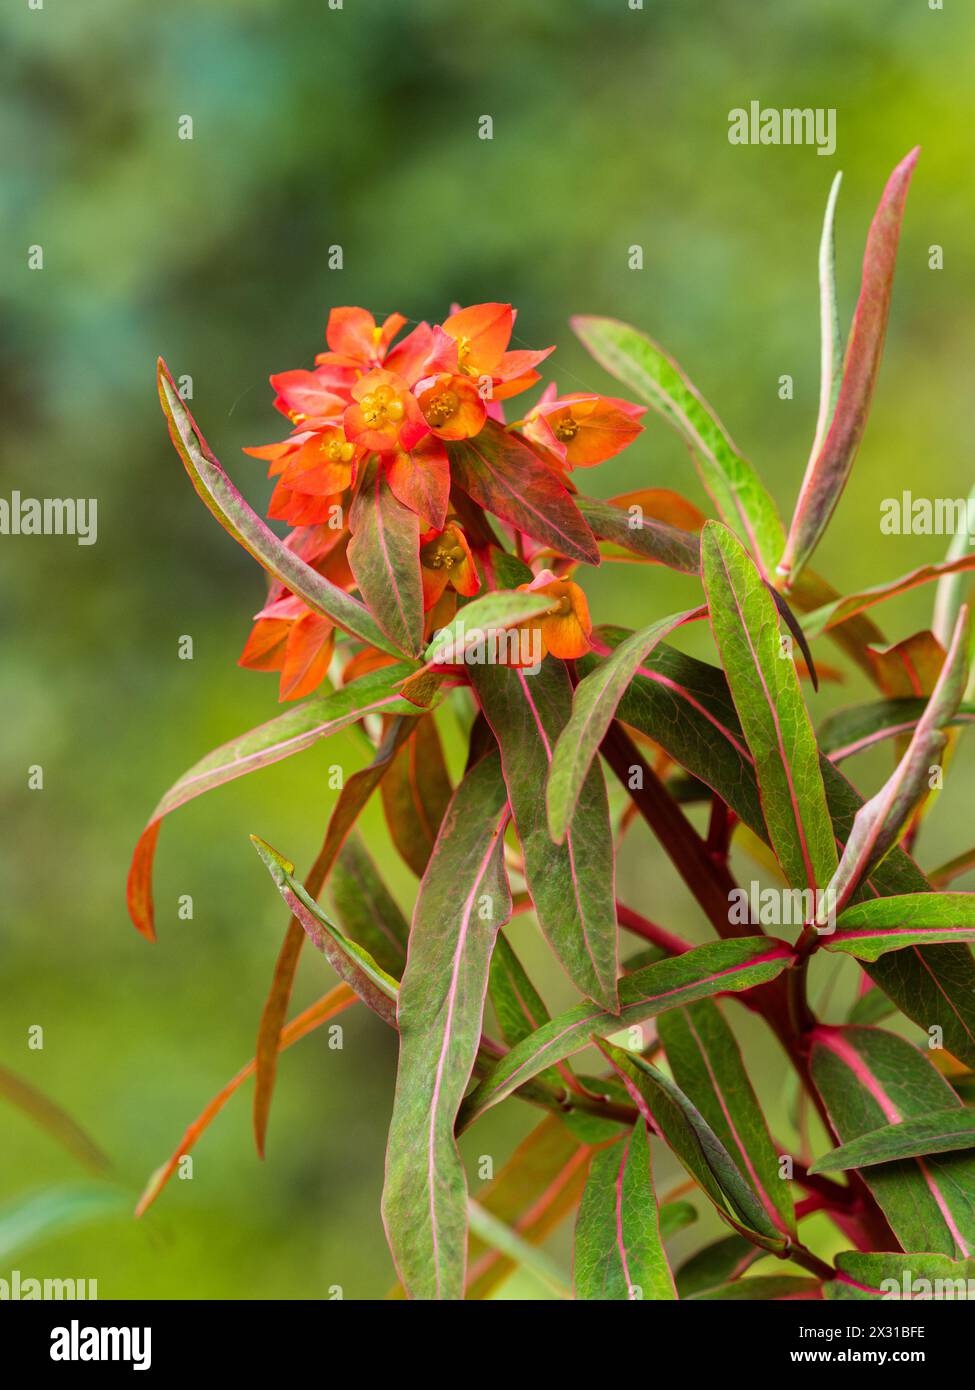 Terminal cluster of red flowers of the spreading hardy perennial spurge, Euphorbia griffithii 'Fireglow' Stock Photo